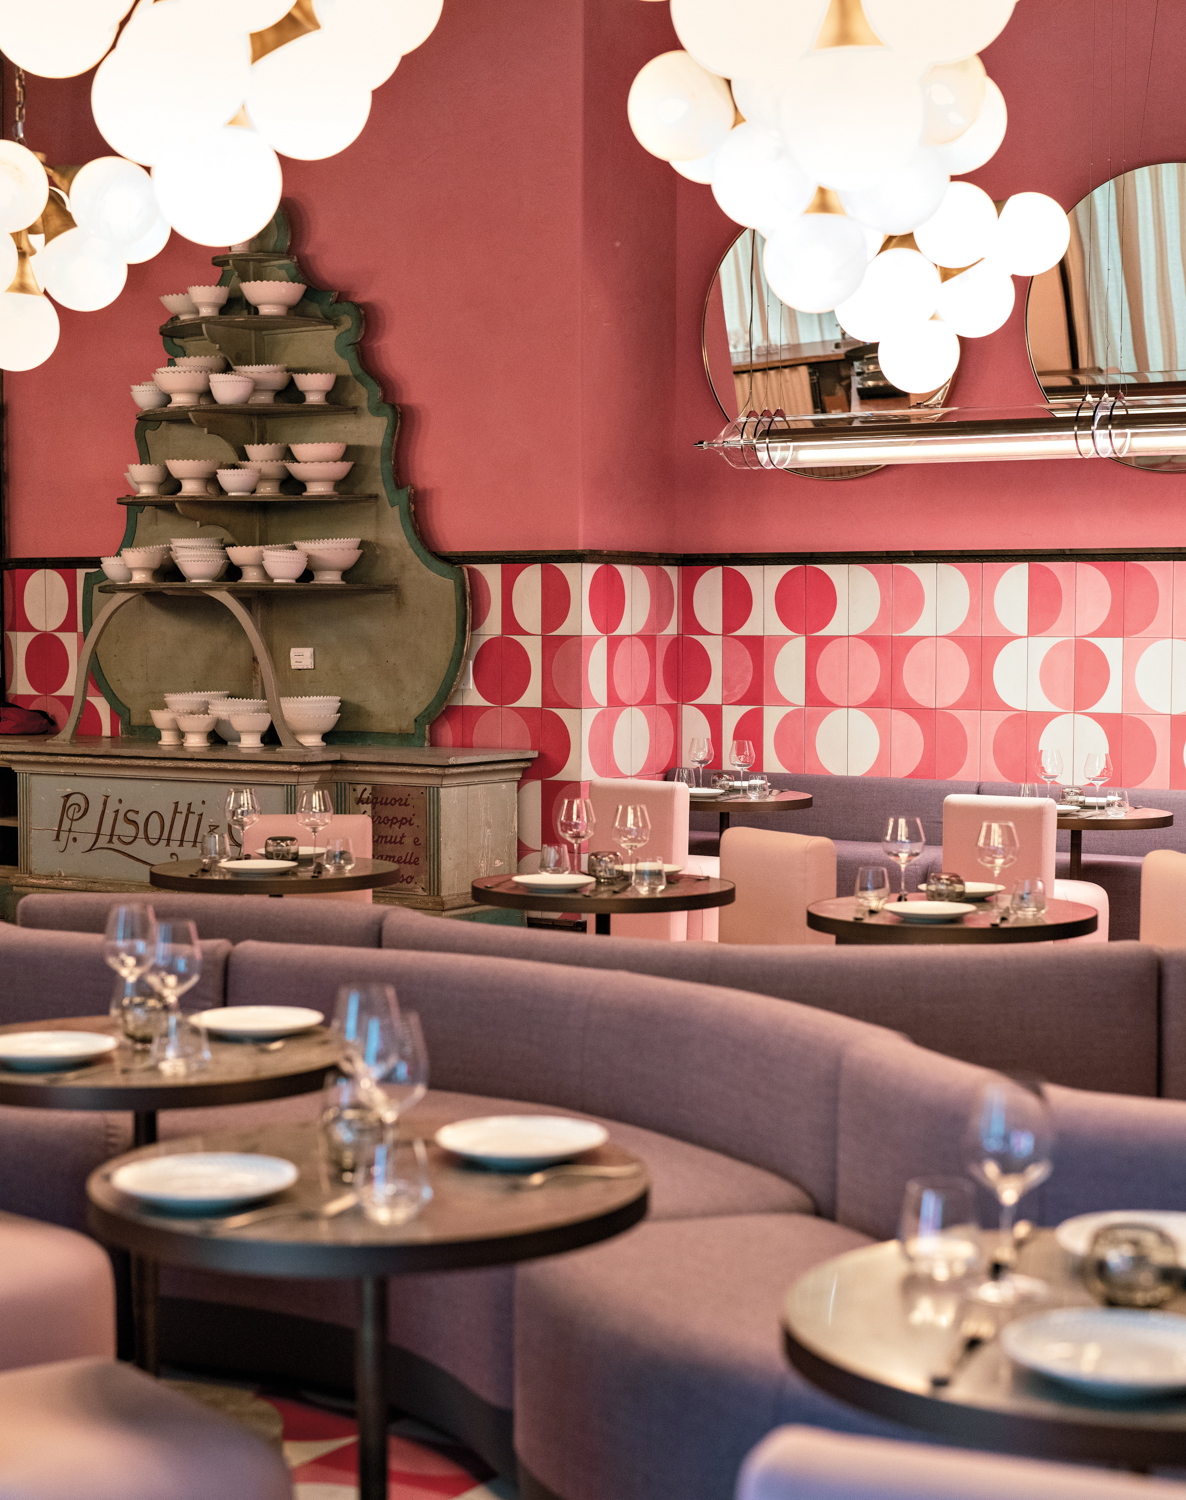 Curved banquettes and round tables create seating backed by pink walls and pink-and-white tiles